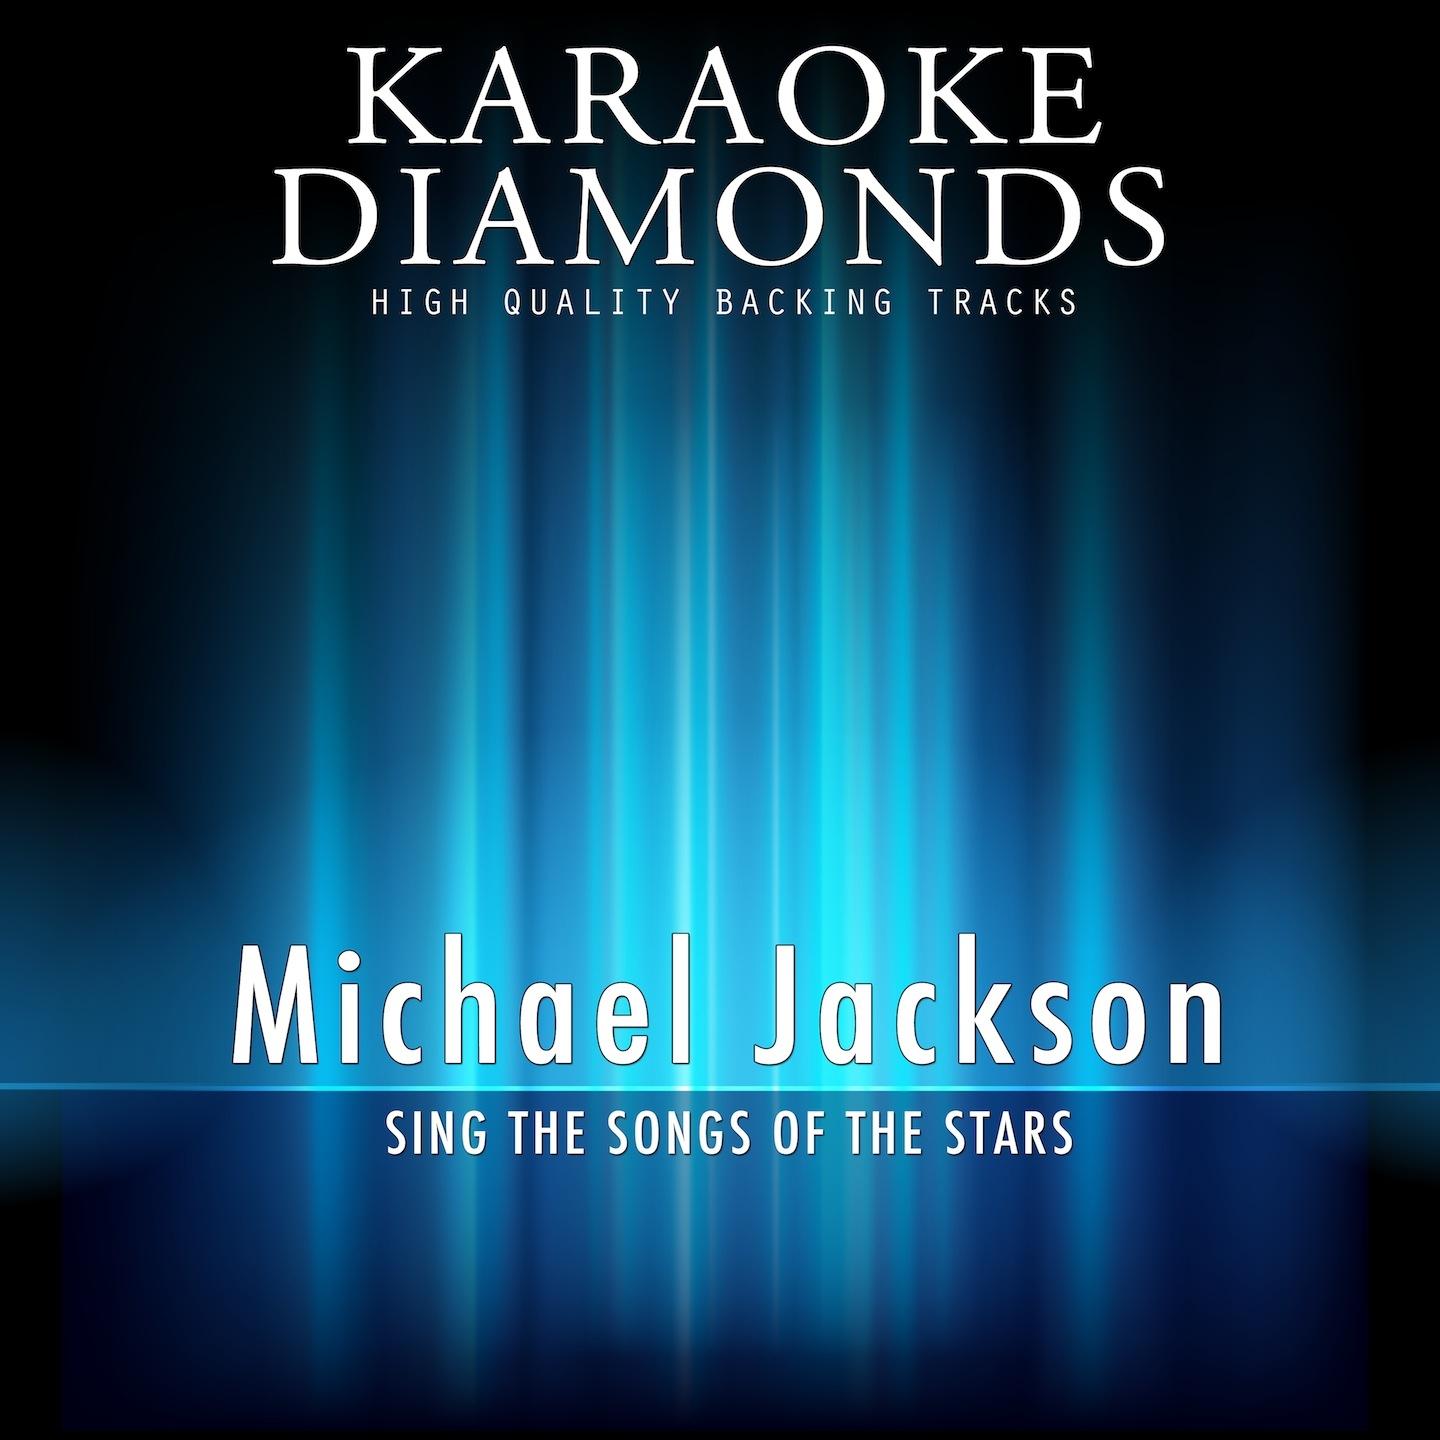 One Day In Your Life (Karaoke Version In the Style of Michael Jackson)